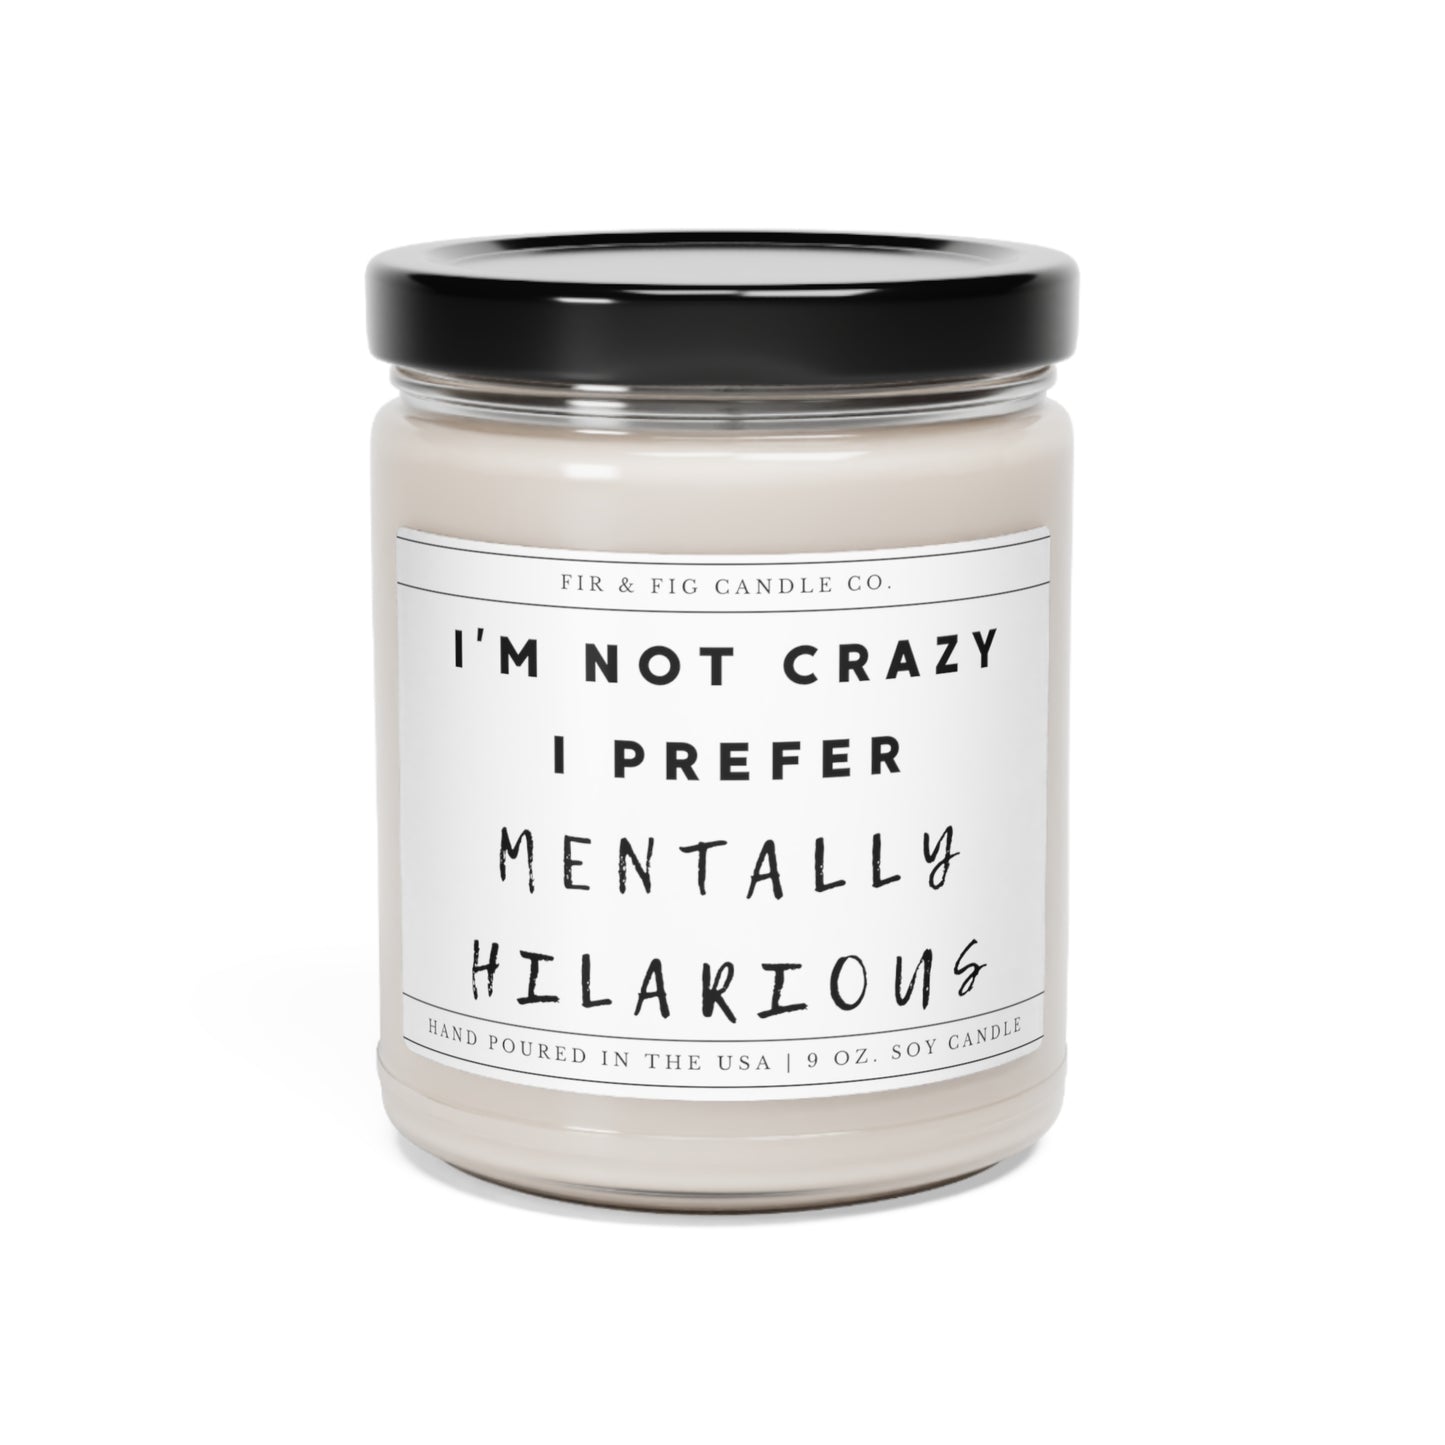 I&#39;m Not Crazy I Prefer Mentally Hilarious 100% Eco-Friendly 9oz Soy Candle, Funny Candle Gift,Gift for Him, Gift for Her, Gift for Mom decor, Funny Candle Gift, Mental Hilarity, Soy Wax Candle Set, Eco-Friendly Fragrance, Humorous Home Decor